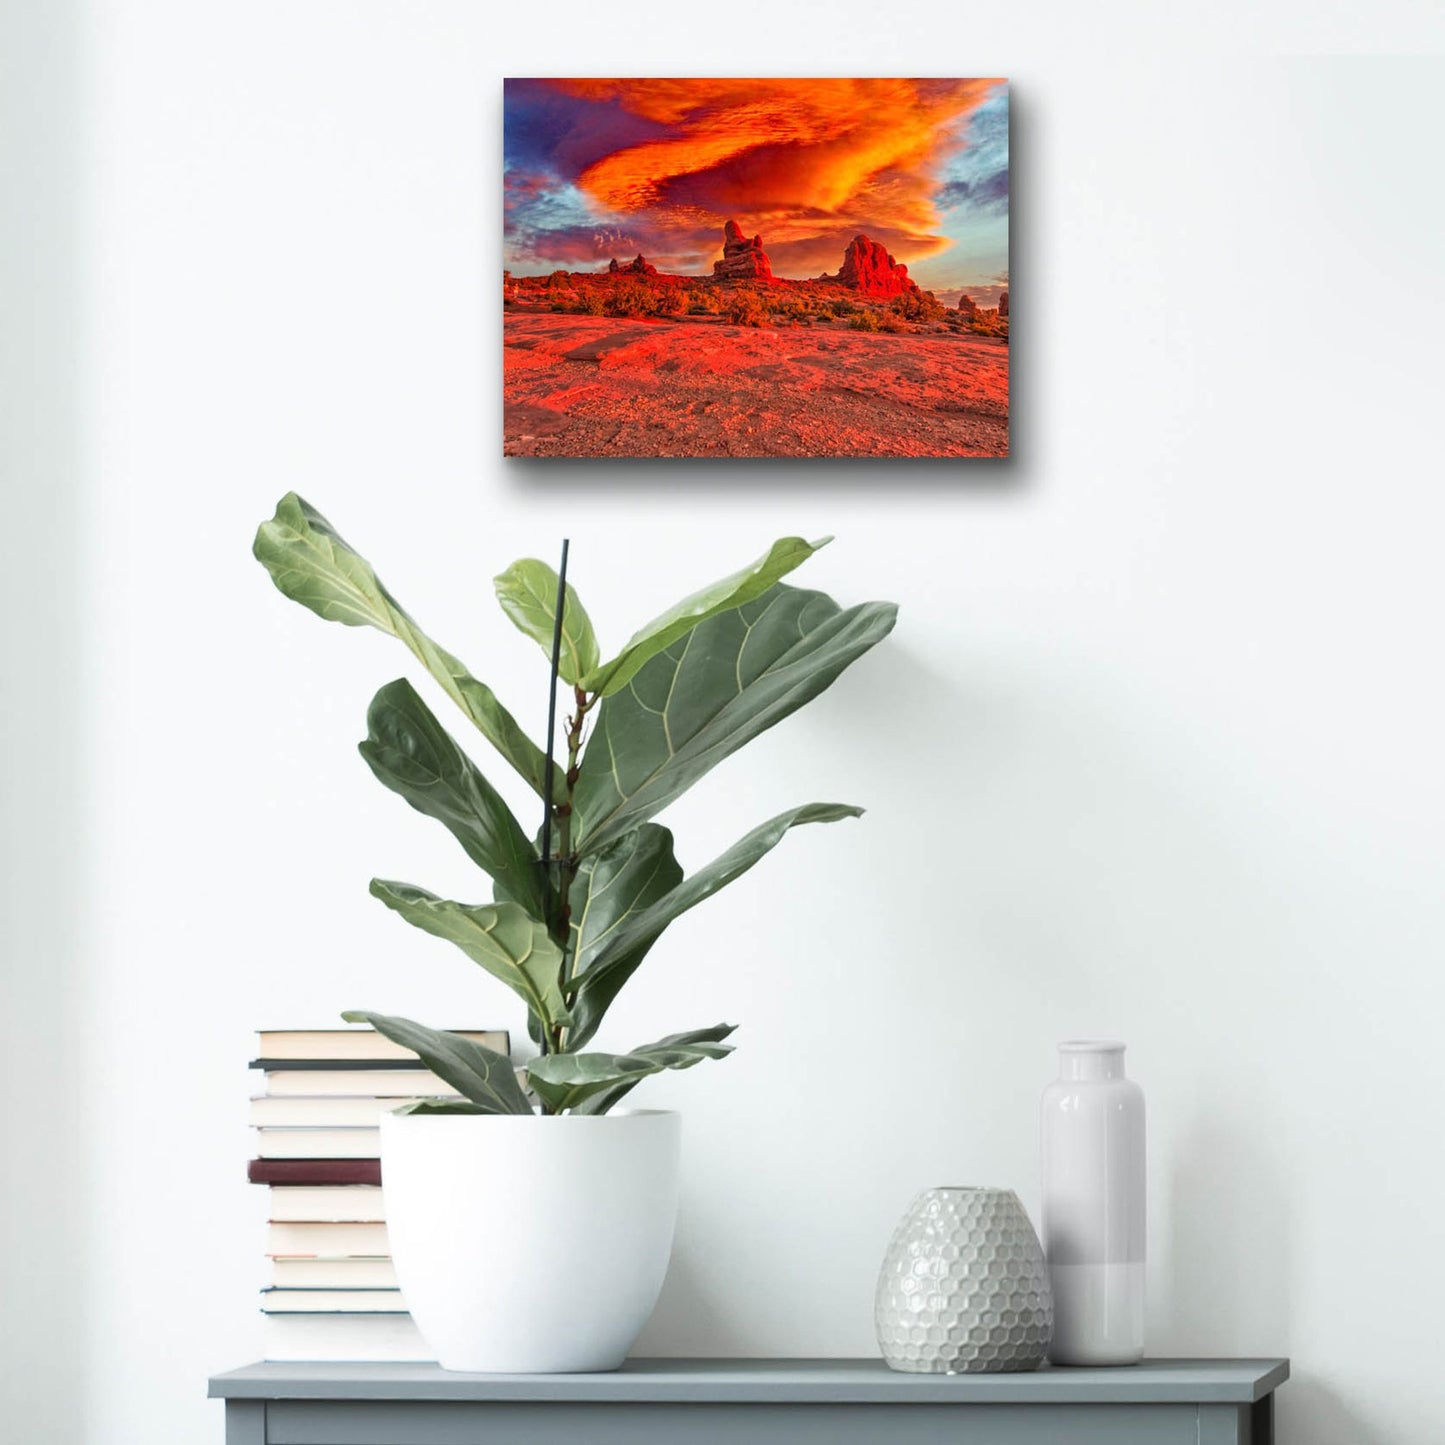 Epic Art 'Arches National Park Sunset' by Mark A Paulda, Acrylic Glass Wall Art,16x12